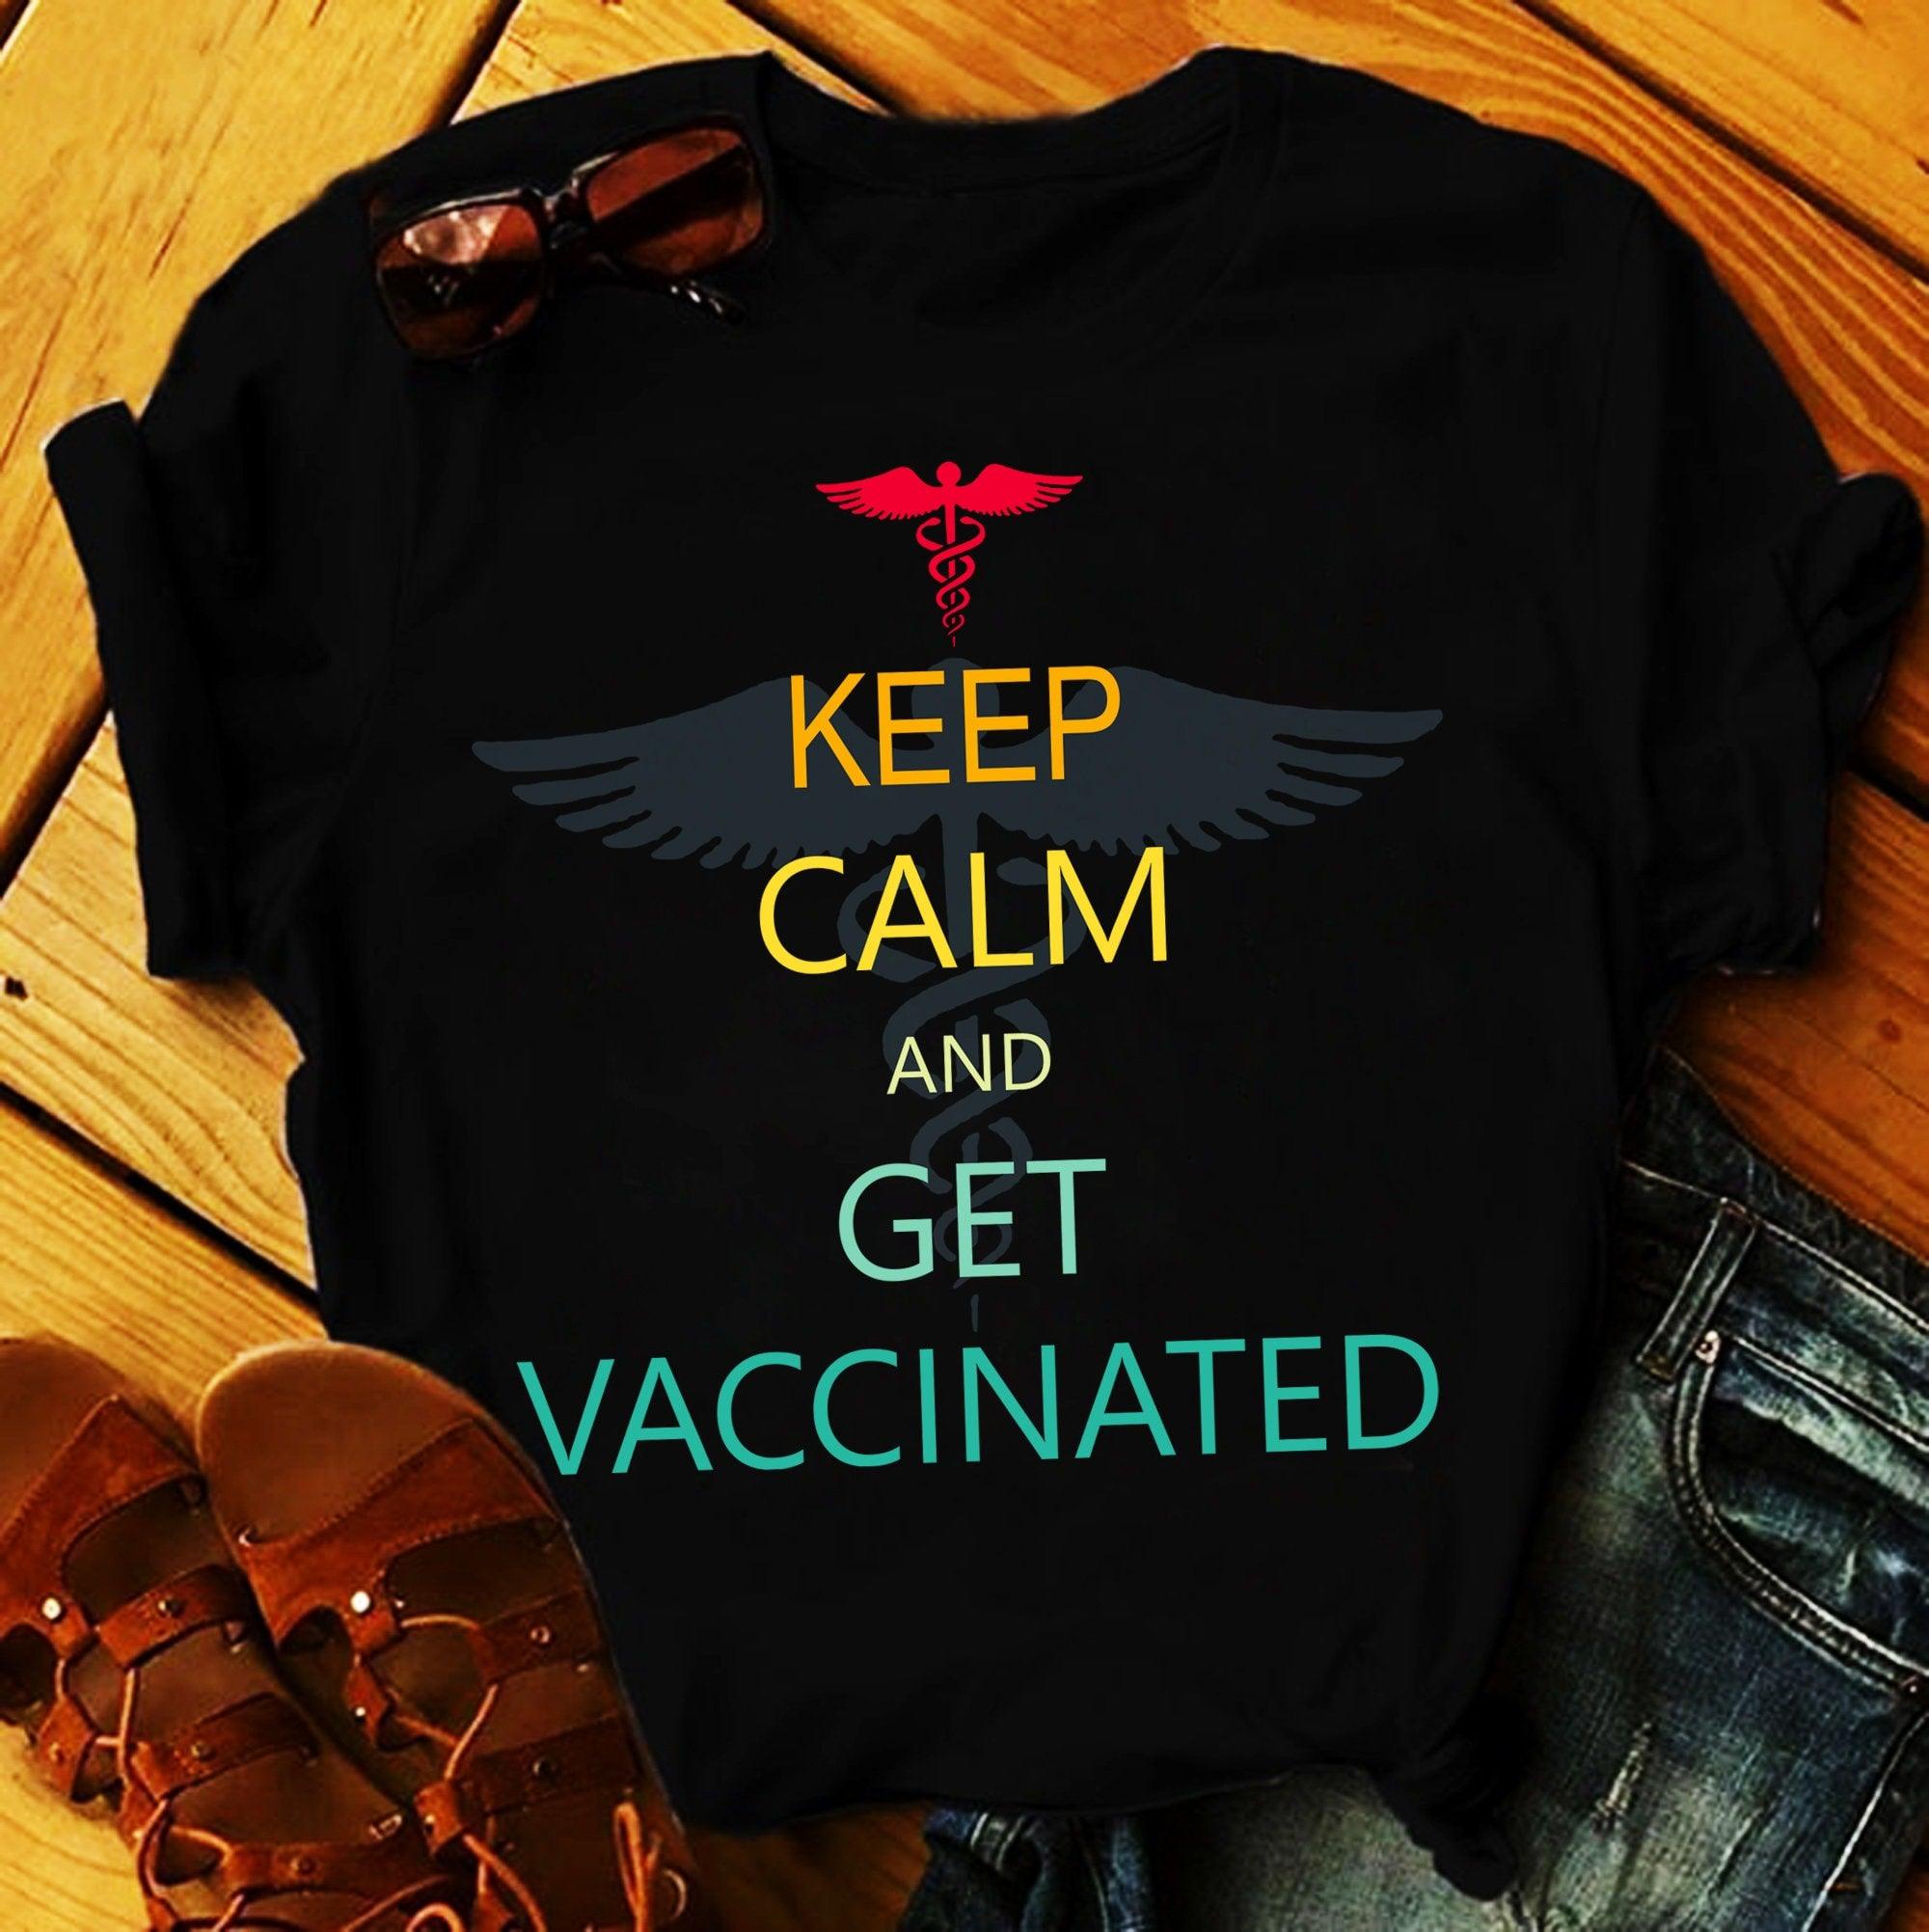 Keep Calm And Get Vaccinated T-Shirts, Vaccination Shirt, Get  Vaccinated Tee, Pro Vaccines Shirt, Nurse Funny Shirt, Vaccines Saves Lives - plusminusco.com